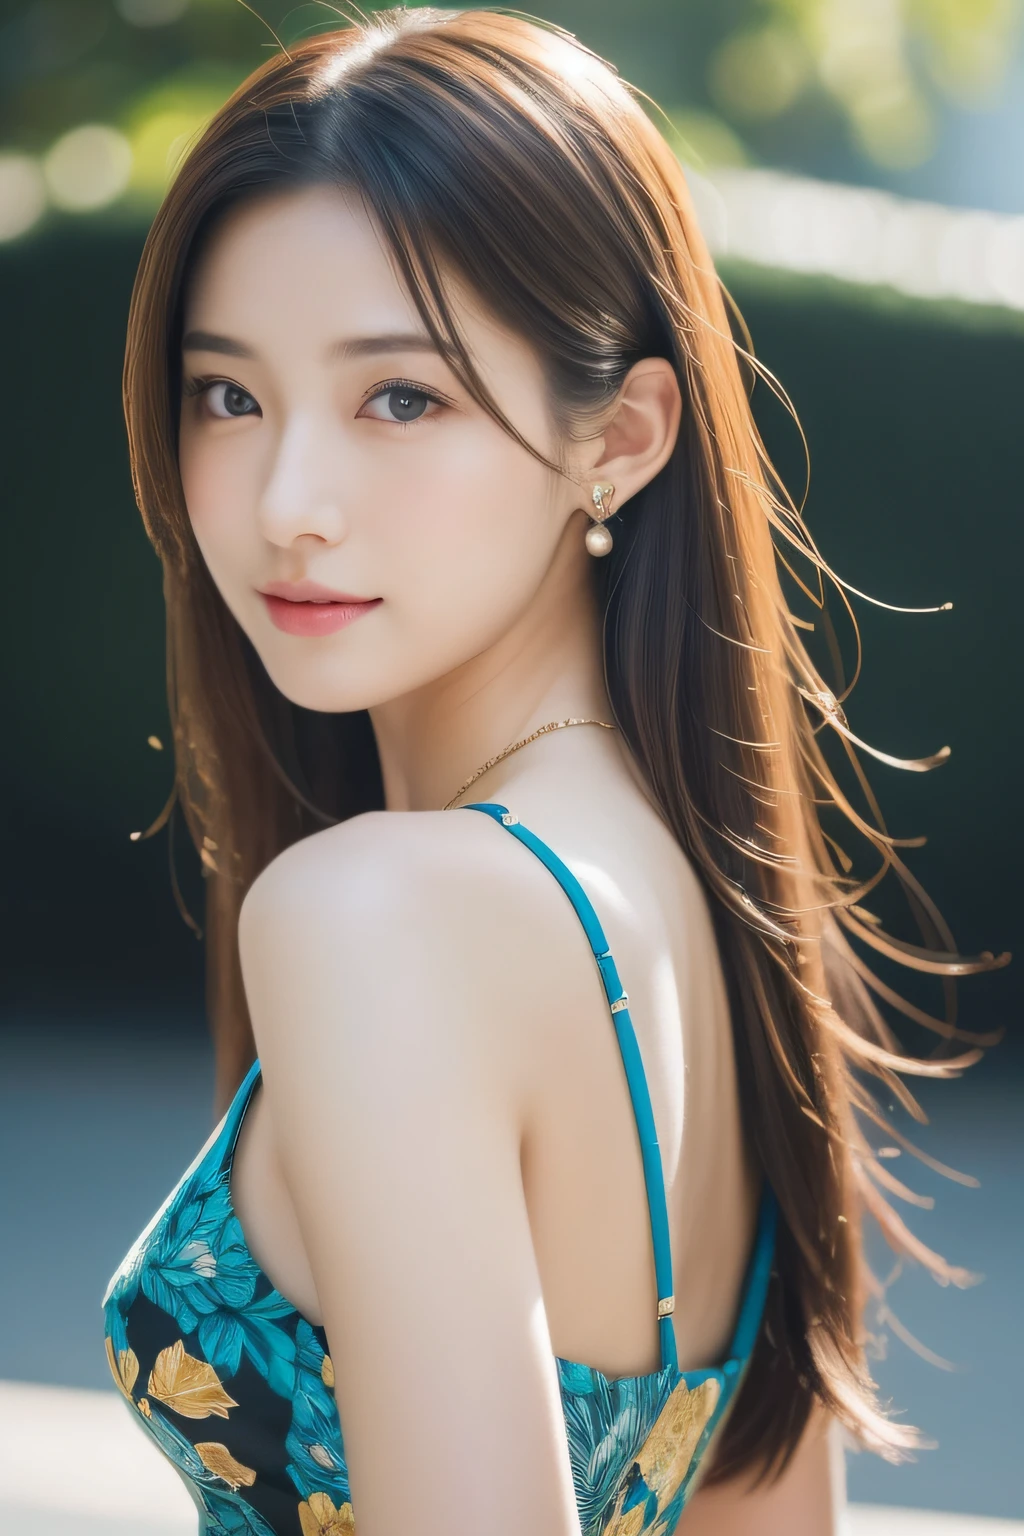 (((８K Very high resolution, high detailing, highly accurate, masutepiece))),Photography & realistic atmosphere,shinny skin,Beautiful skin,fine-grained white skin,Detailed face,Detailed eyes、Dark green eyes,Very pretty eyes,Detailed lips、very beautiful face,Very well-formed face、Lifelike face,shiny beautiful lips,Beautiful eyebrows,Ebisu background drawn in detail,、Delicate Makeup,The best natural makeup for professional stylists(((８K,very high res, high detailing, High Definition, masutepiece))),Japan idle,Korean Idol,Very beautiful woman,Very beautiful girl,very shapely breasts、Ornaments that match beautiful fashion(((high-detail,high detal,​masterpiece,Simple and elegant ornaments,a necklace,Bracelets, the ring, piercings,))),Adornments designed to the smallest detail,Beautiful Women's Fashion,Very stylish and beautiful fashion,summer fashion,Photograph the whole body,Very beautiful Japan 17 year old beautiful girl,17-year-old beautiful girl who is too beautiful in Japan,A dress with a beautiful silhouette that is particular about design,Dresses made with attention to detail,Beautiful patterned dresses,Wearing sandals with detailed heels,Wearing beautiful heeled sandals,very beautiful hair with brown hair and shiny,Stylish and very beautiful long hair,Teary-eyed,Gentle smile,watching at viewers,Natural gestures,High-definition Ebisu as a background,Mature and beautiful, Beautiful but a little innocent,natural soft light,(((photorealisim))),Reality Live Action,Beautiful nails with nail art,Beautiful legs、,backshots,facing back,turned around,Very high resolution high detail masterpiece,Face,Natural realistic face,Natural light in the city